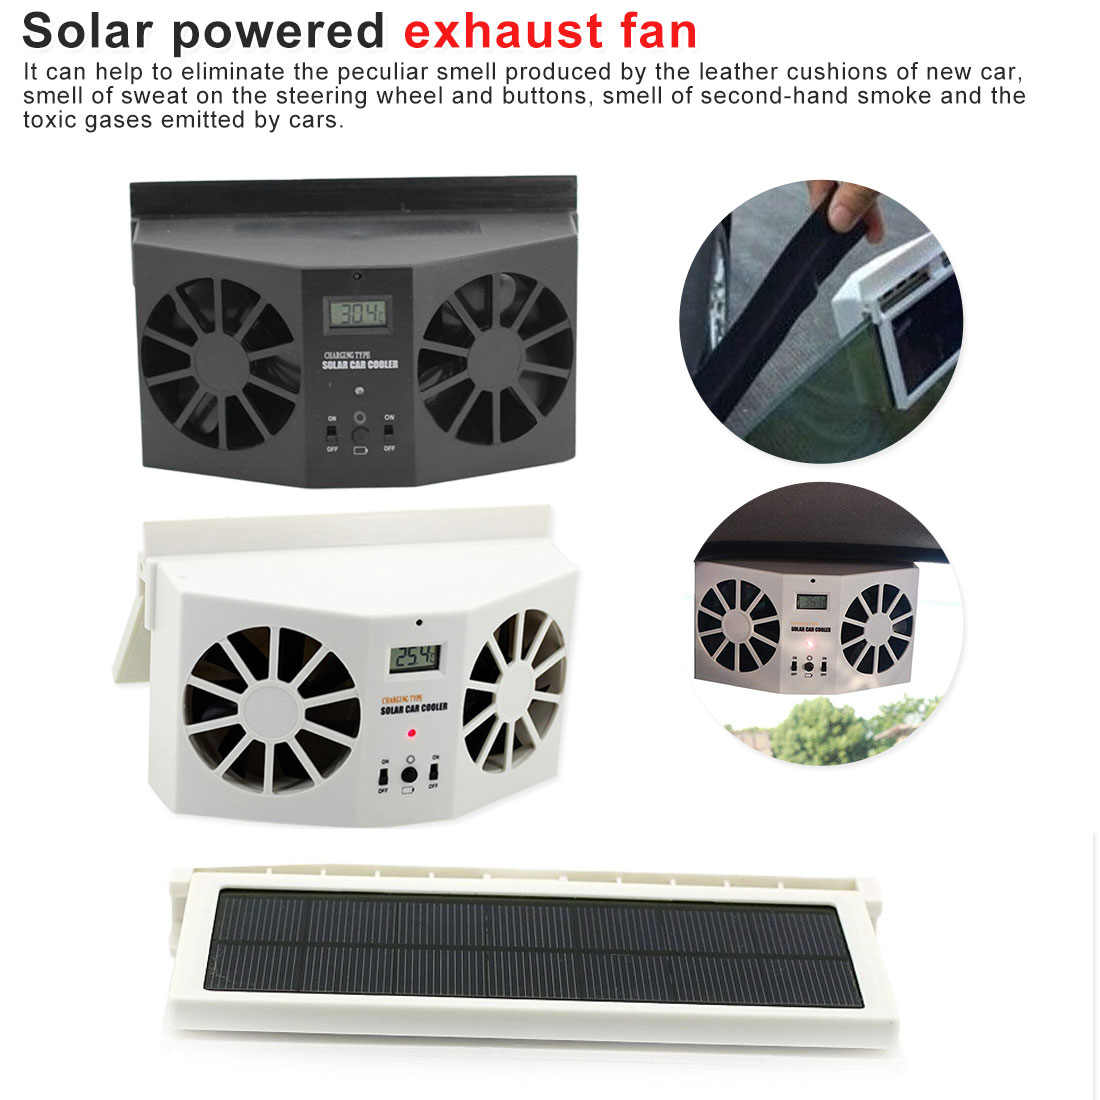 Us 1966 43 Offcar Solar Powered Exhaust Fan Folding Solar Powered Auto Car Window Air Vent Cooling Dual Fan Mini Cooler Radiator Car Inverters throughout proportions 1100 X 1100